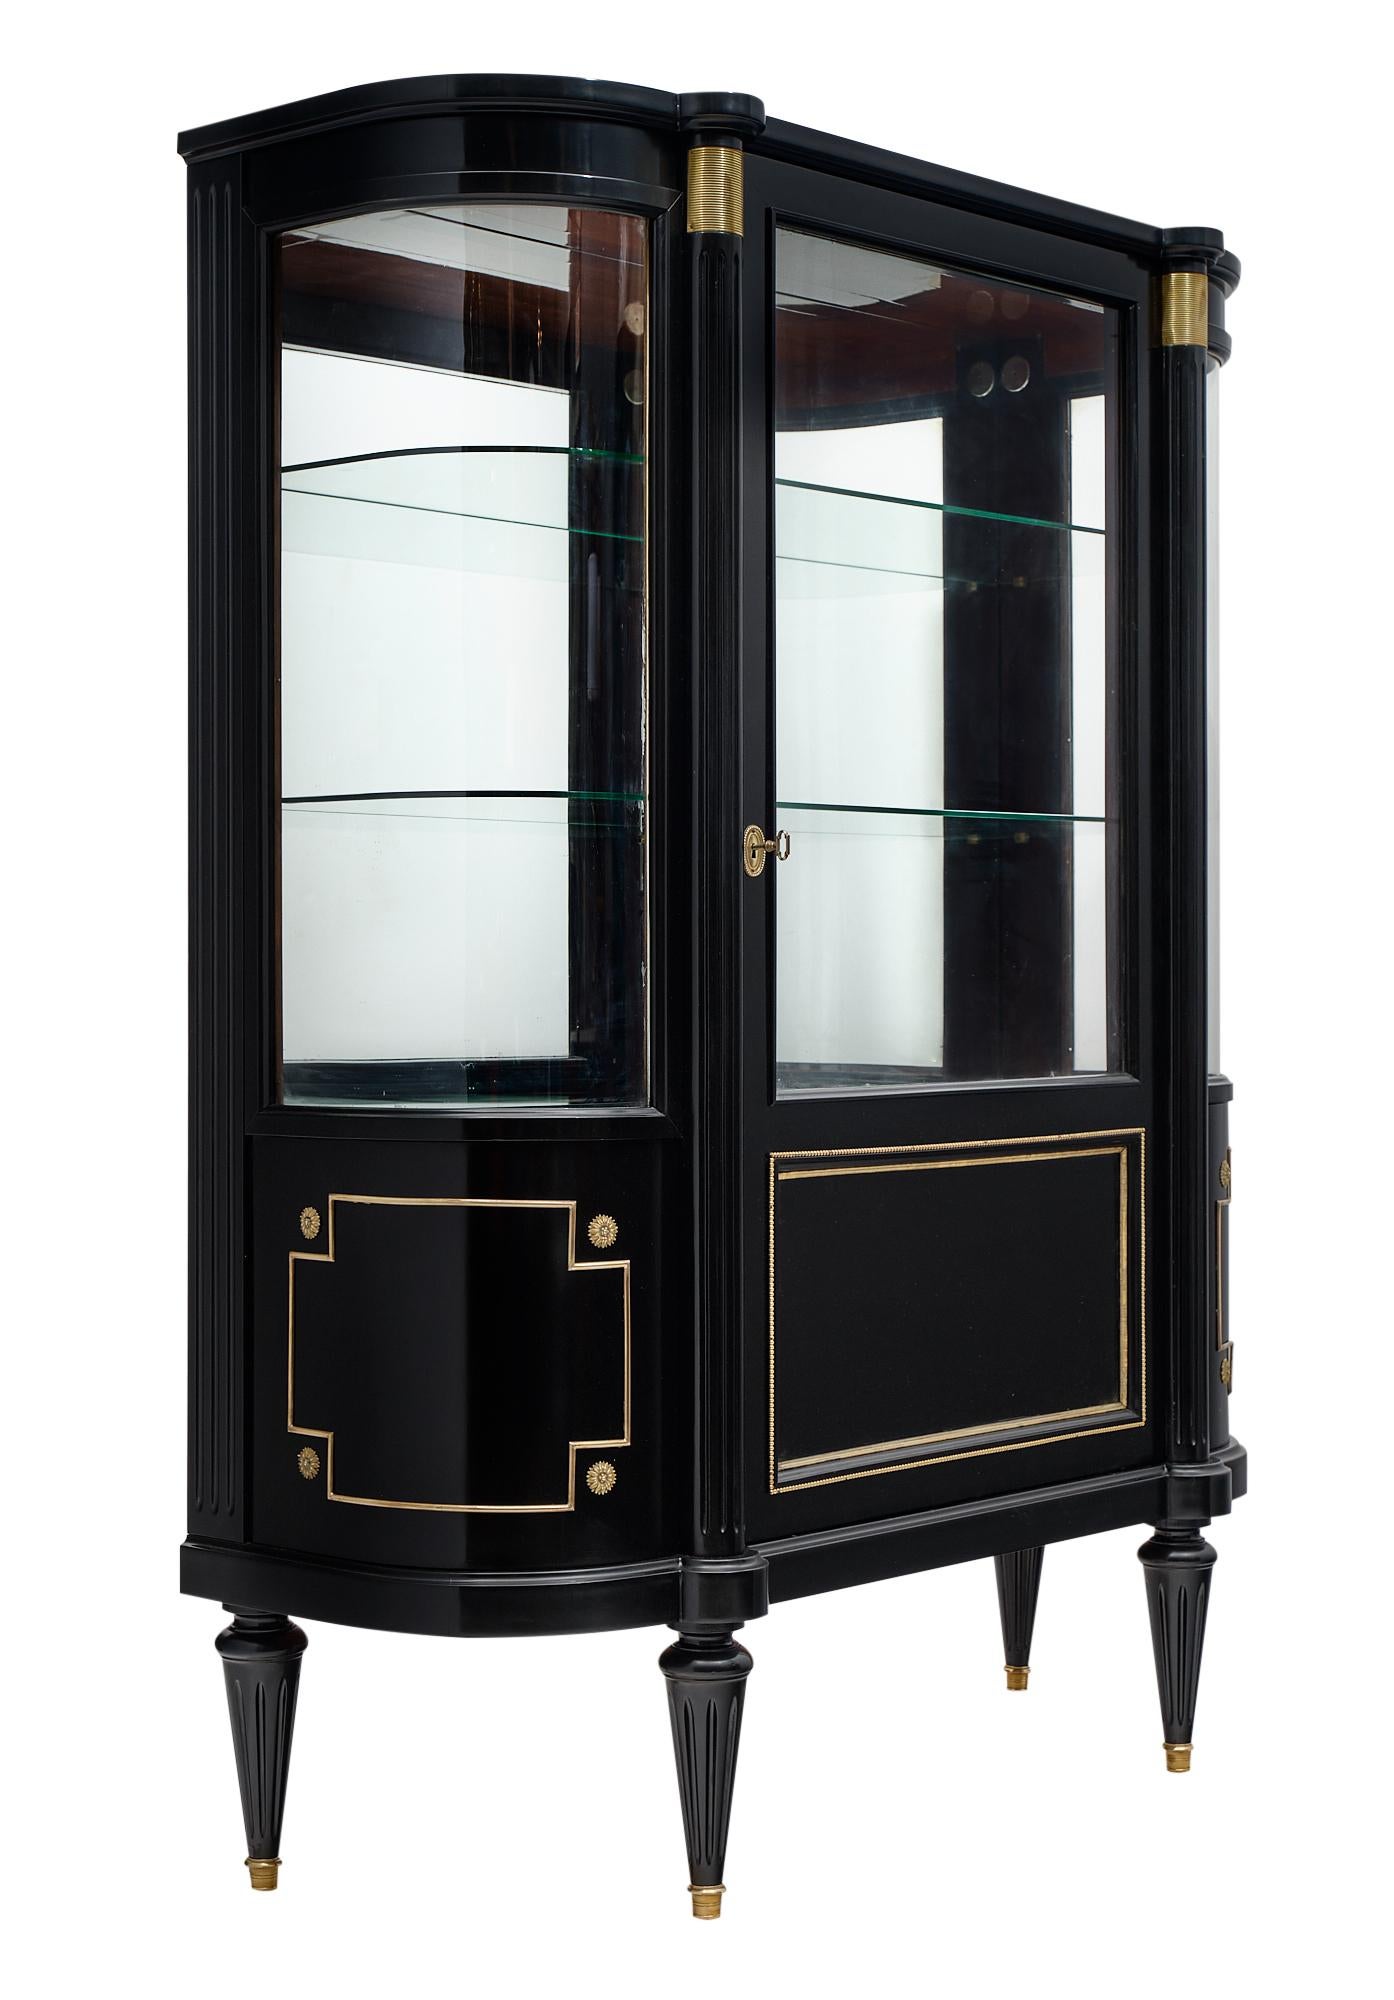 Louis XVI style bookcase from France made of mahogany that has been ebonized and finished with a museum-quality French polish. We love the curved glass shelves and brass trim throughout.